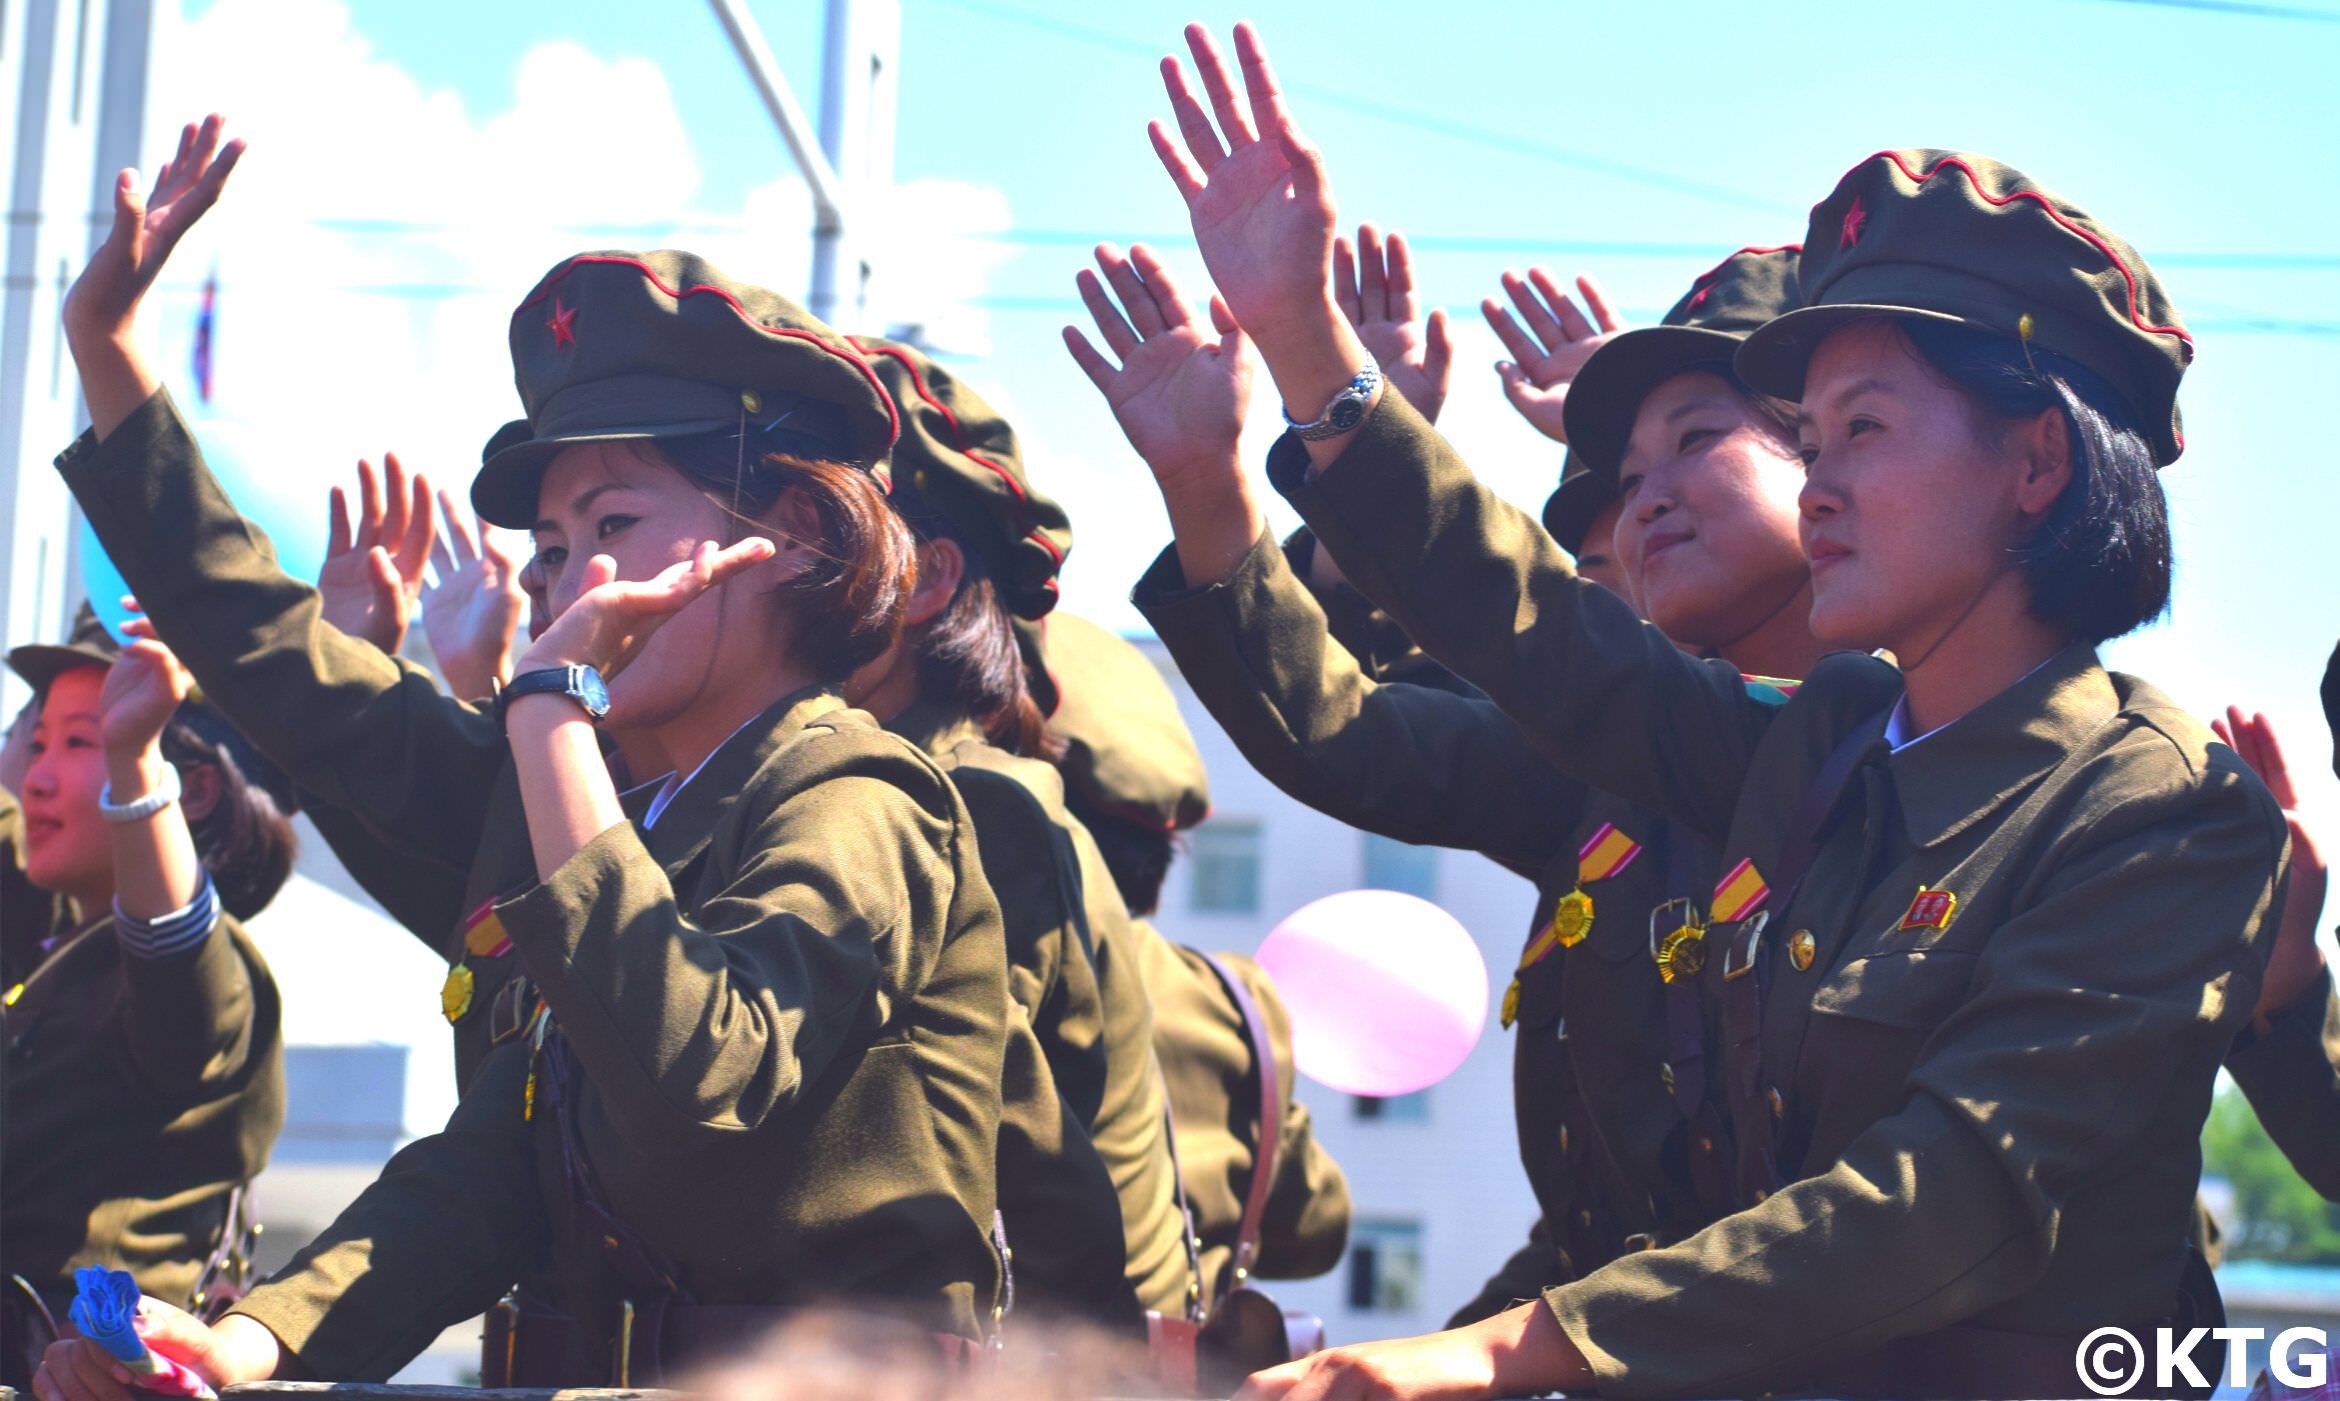 North Korean female soldiers at a military parade in Pyongyang capital city of the DPRK. Trip to North Korea arranged by KTG Tours